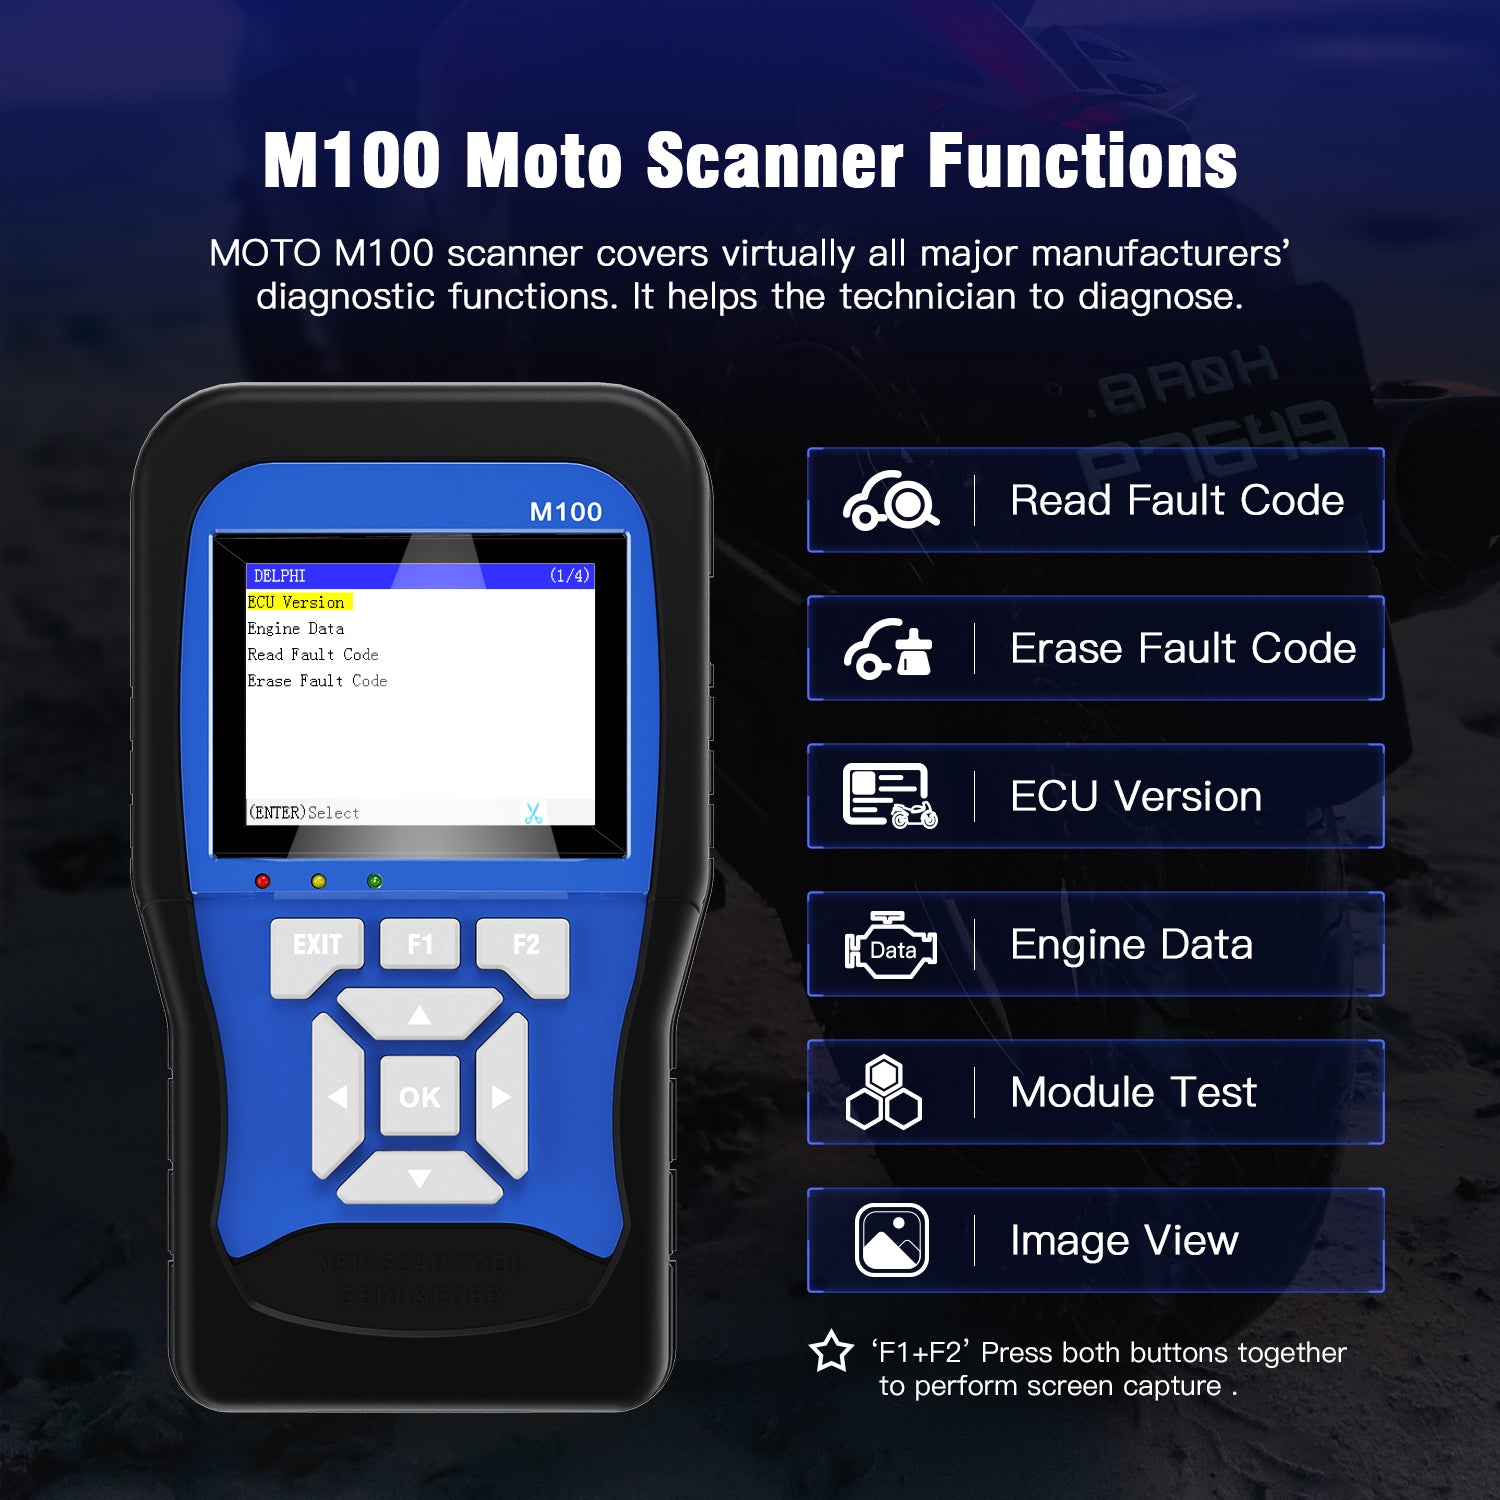 M100 Motorcycle Diagnostic Tool for Kawasaki Yamaha Suzuki Moto Scanner with Battery Tester 2 in 1 Dual System Detection